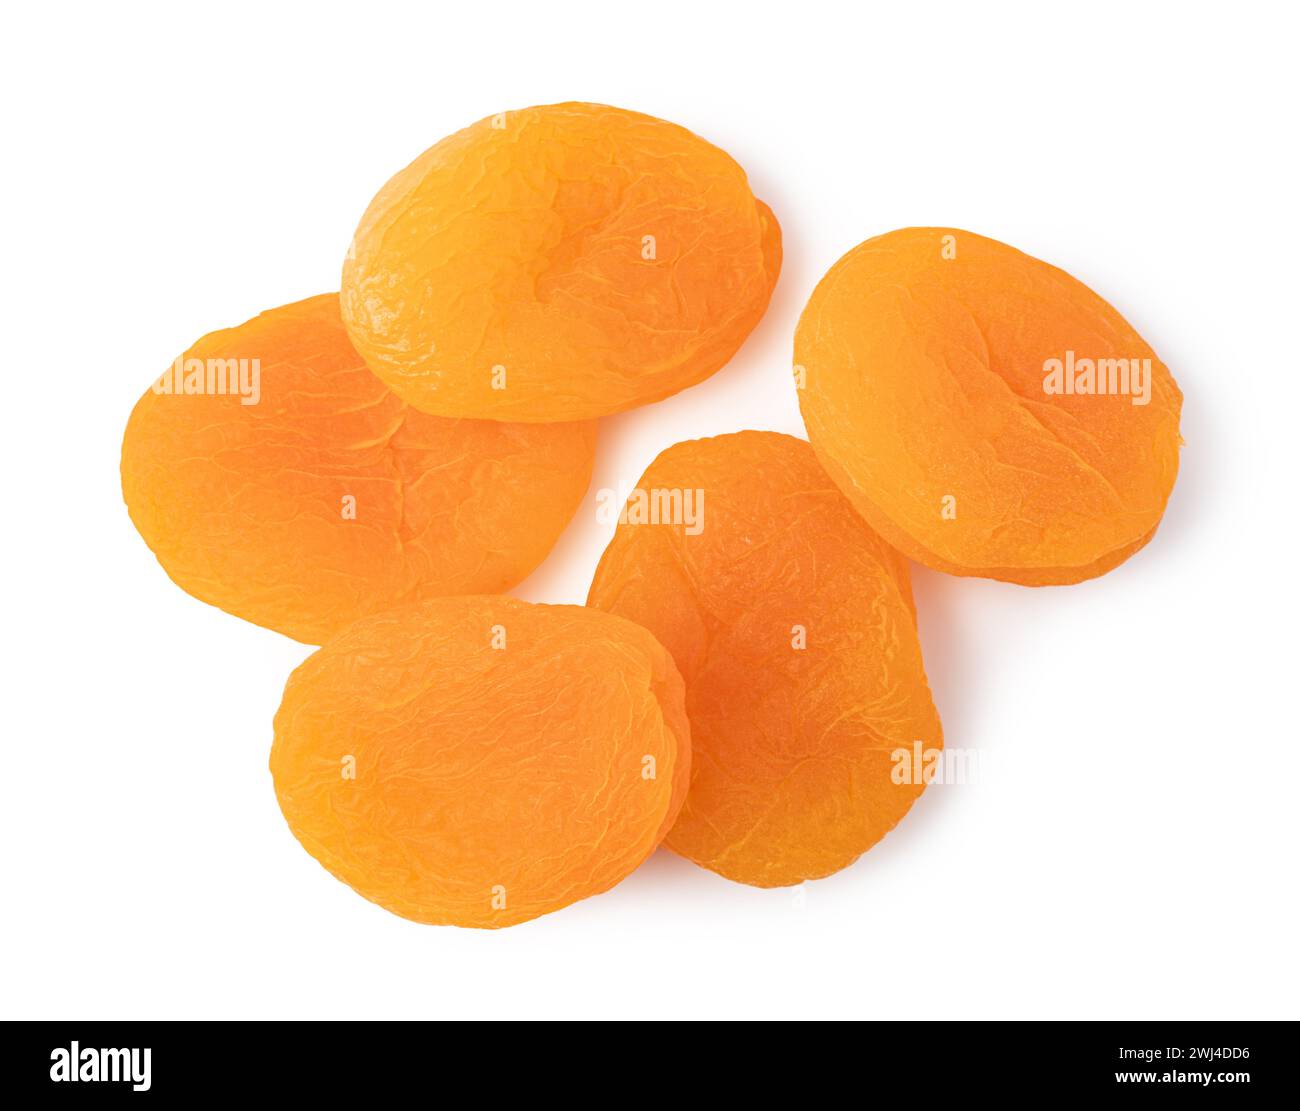 Dried apricots on white background. Stock Photo